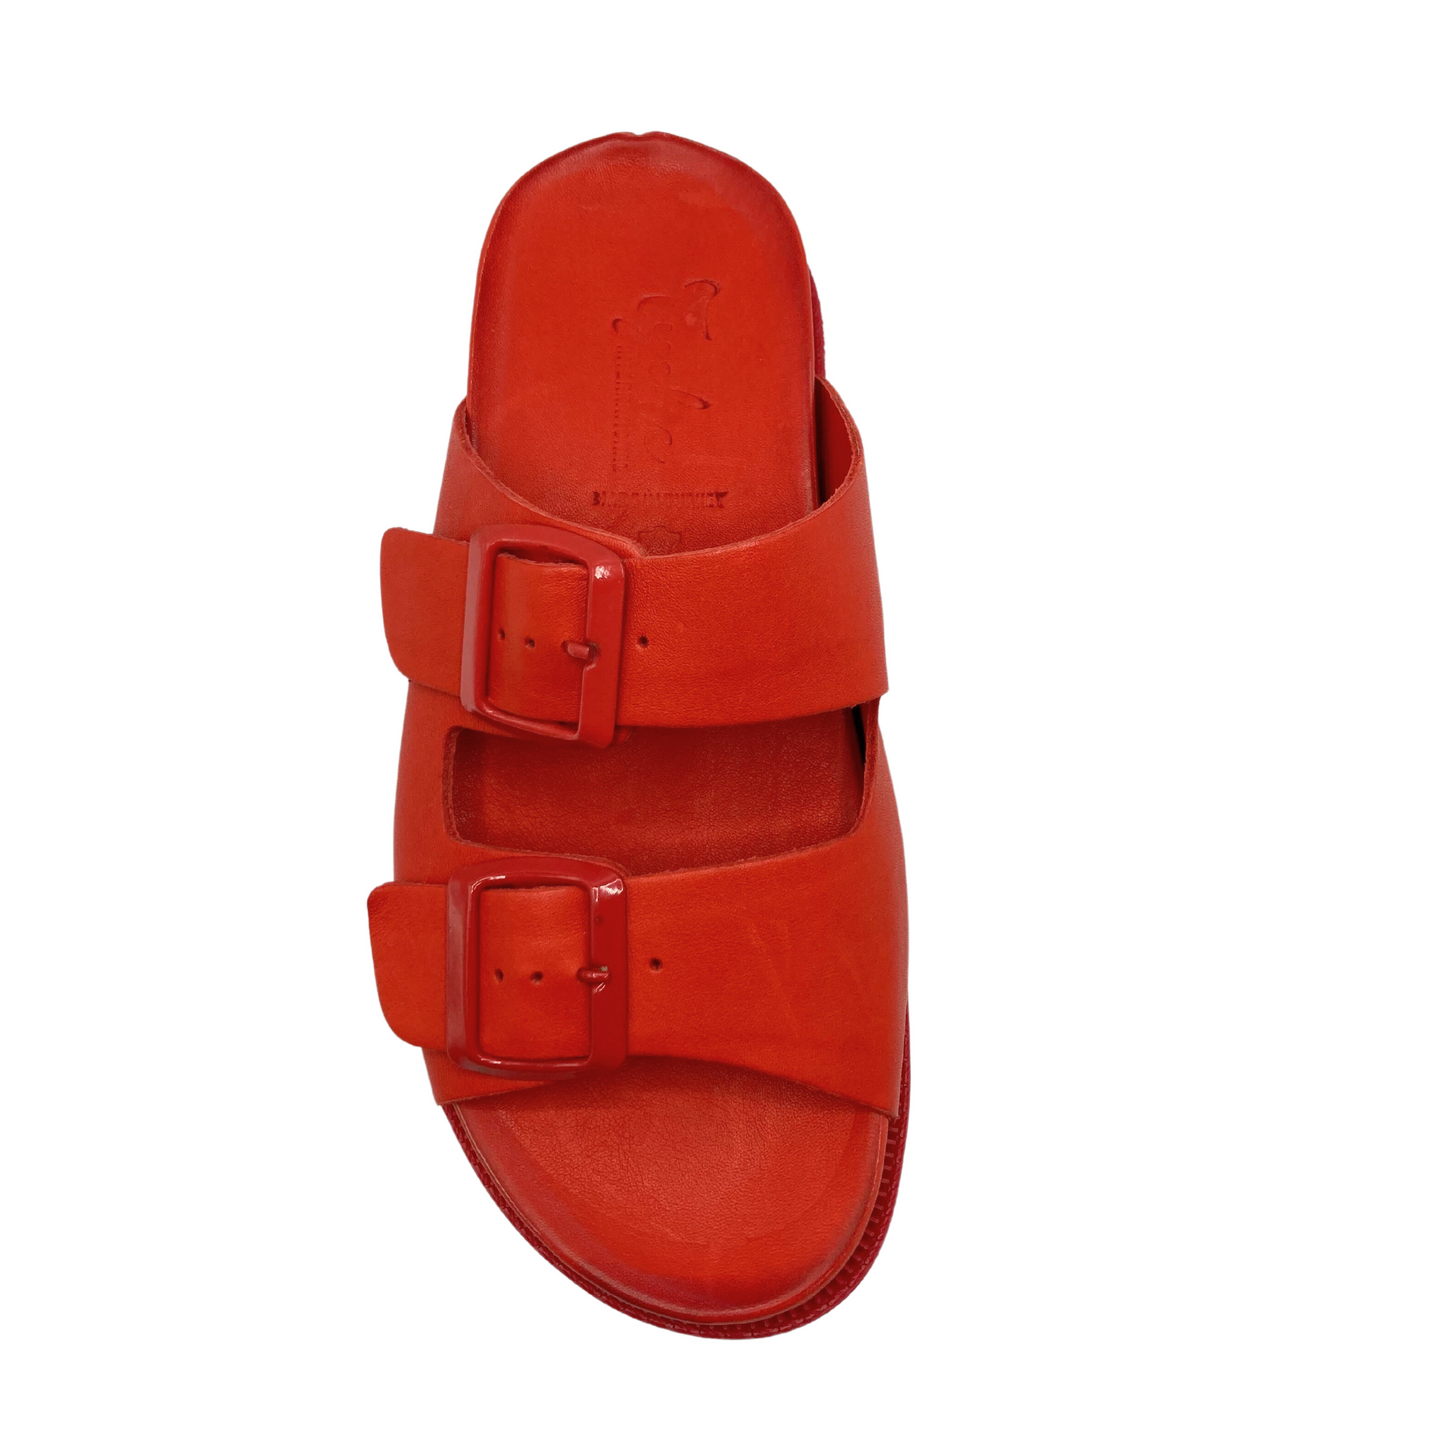 Top down view of a flat summer sandal in a deep red leather.  Open toe and back with 2 cross straps. Both straps are adjustable